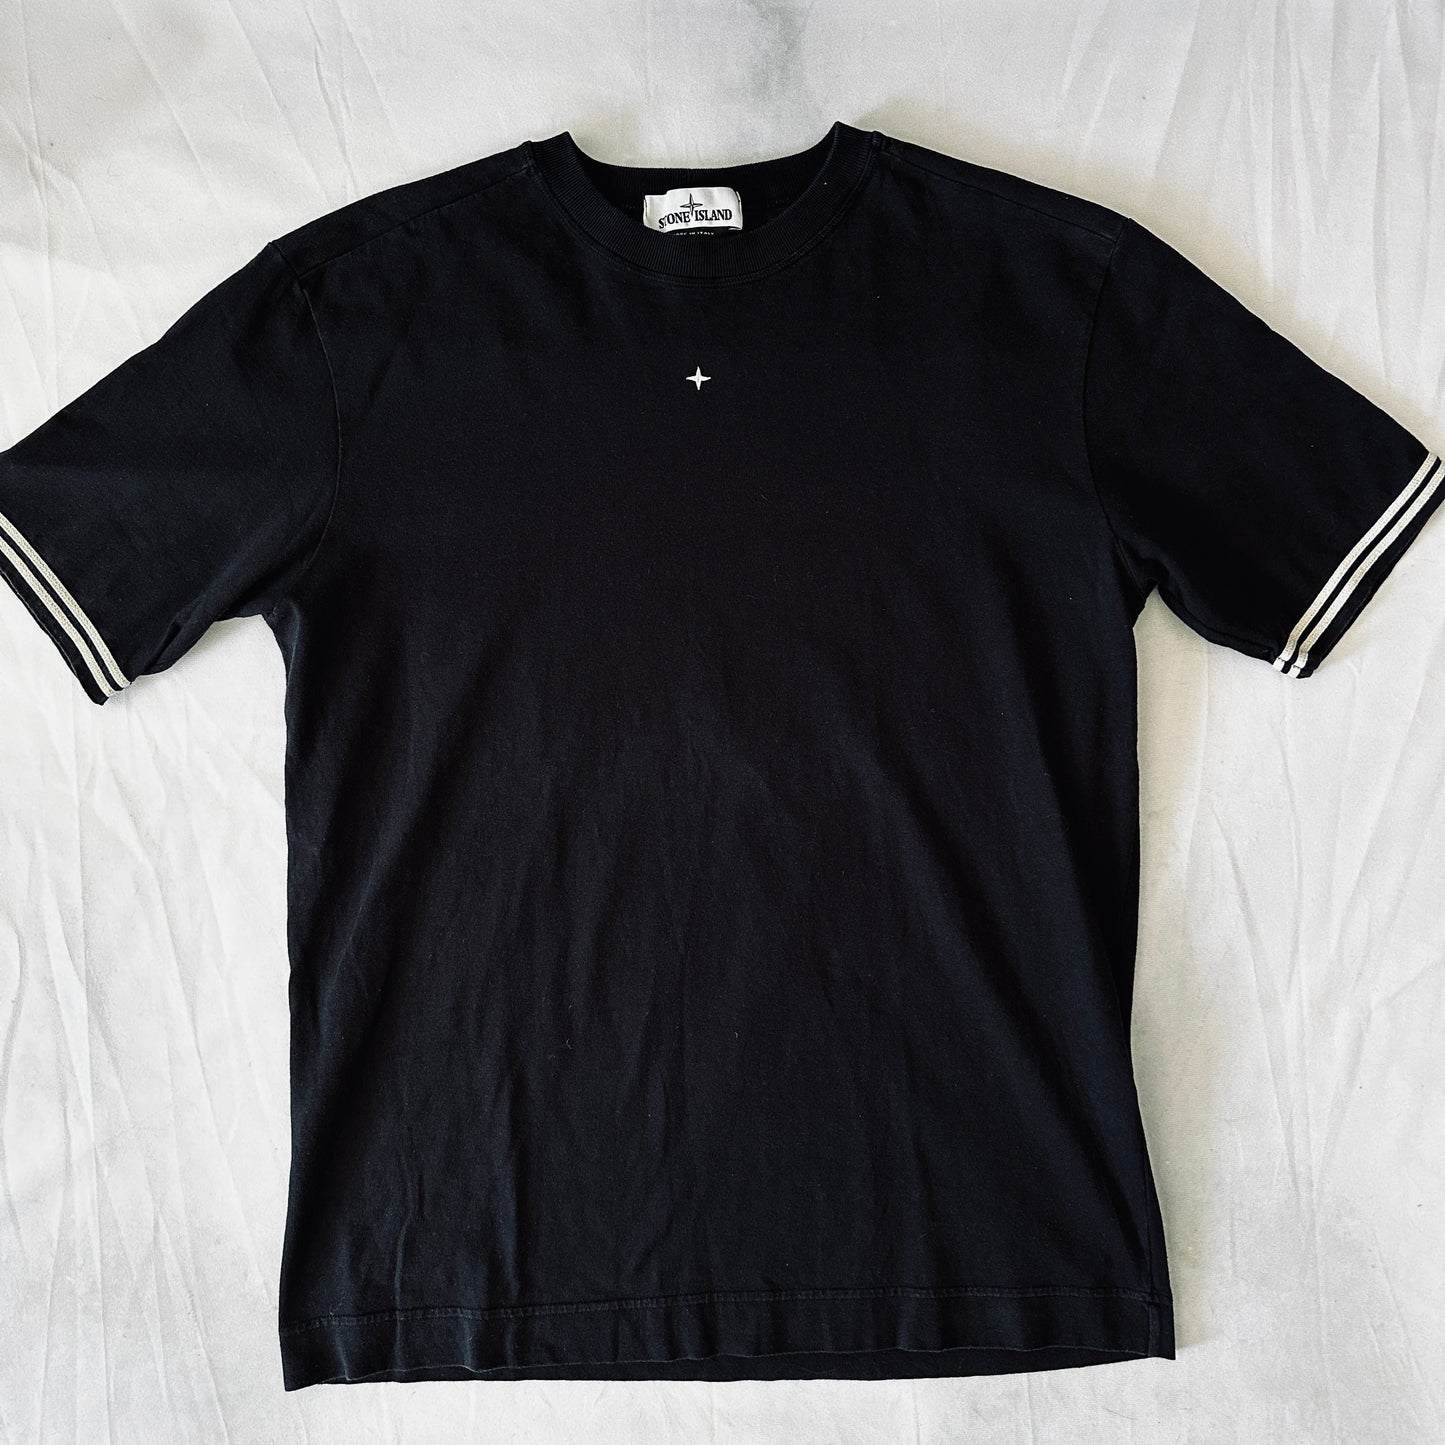 Stone Island T-Shirt - L - Made in Italy